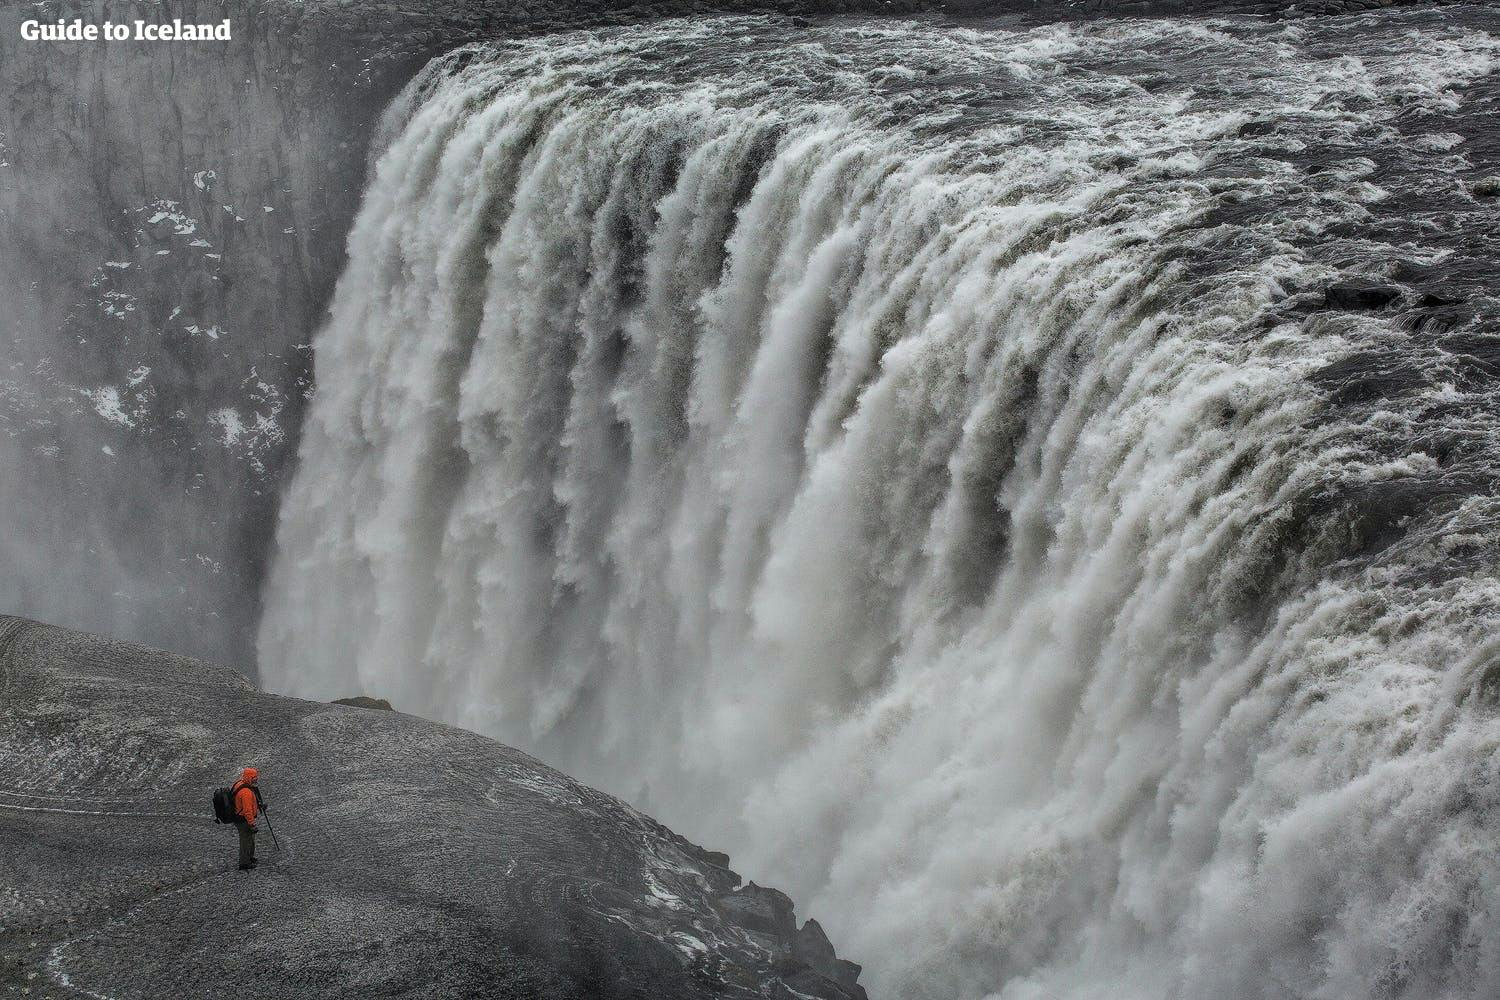 A photographer captures the sheer might of Dettifoss waterfall.